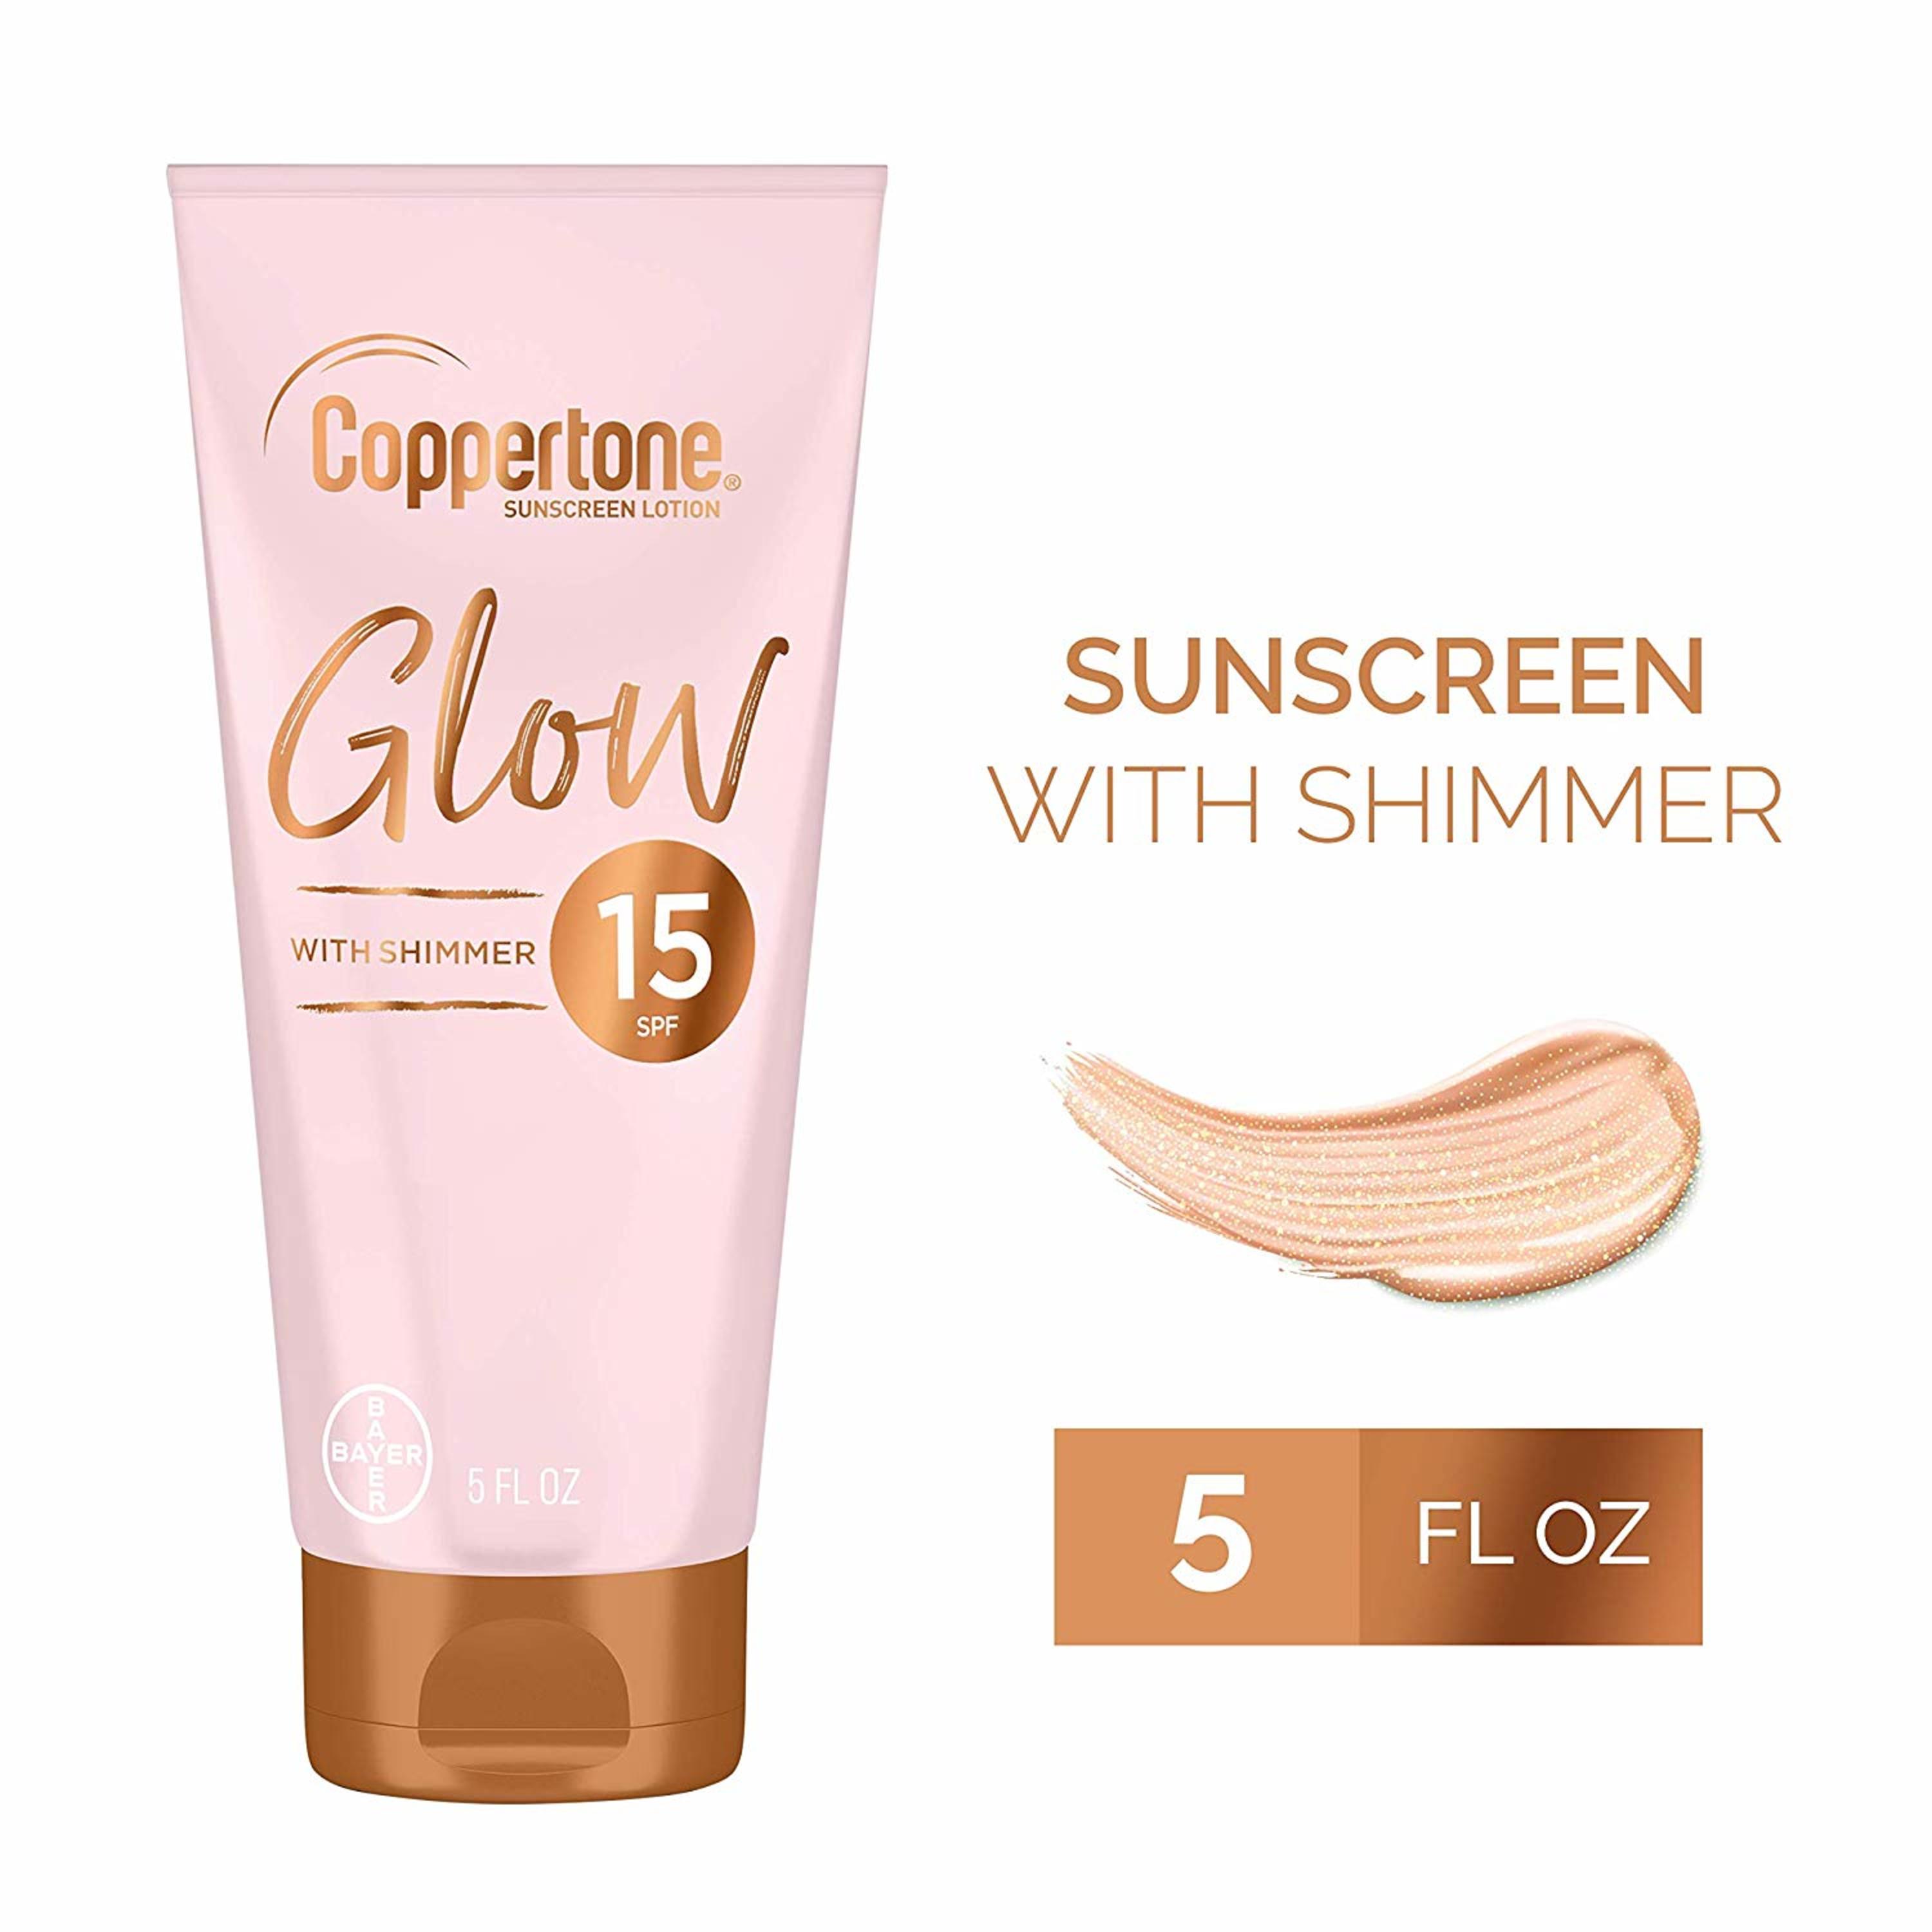 Coppertone Glow Shimmering Sunscreen Lotion with Broad Spectrum SPF 15, 5 oz - image 3 of 6